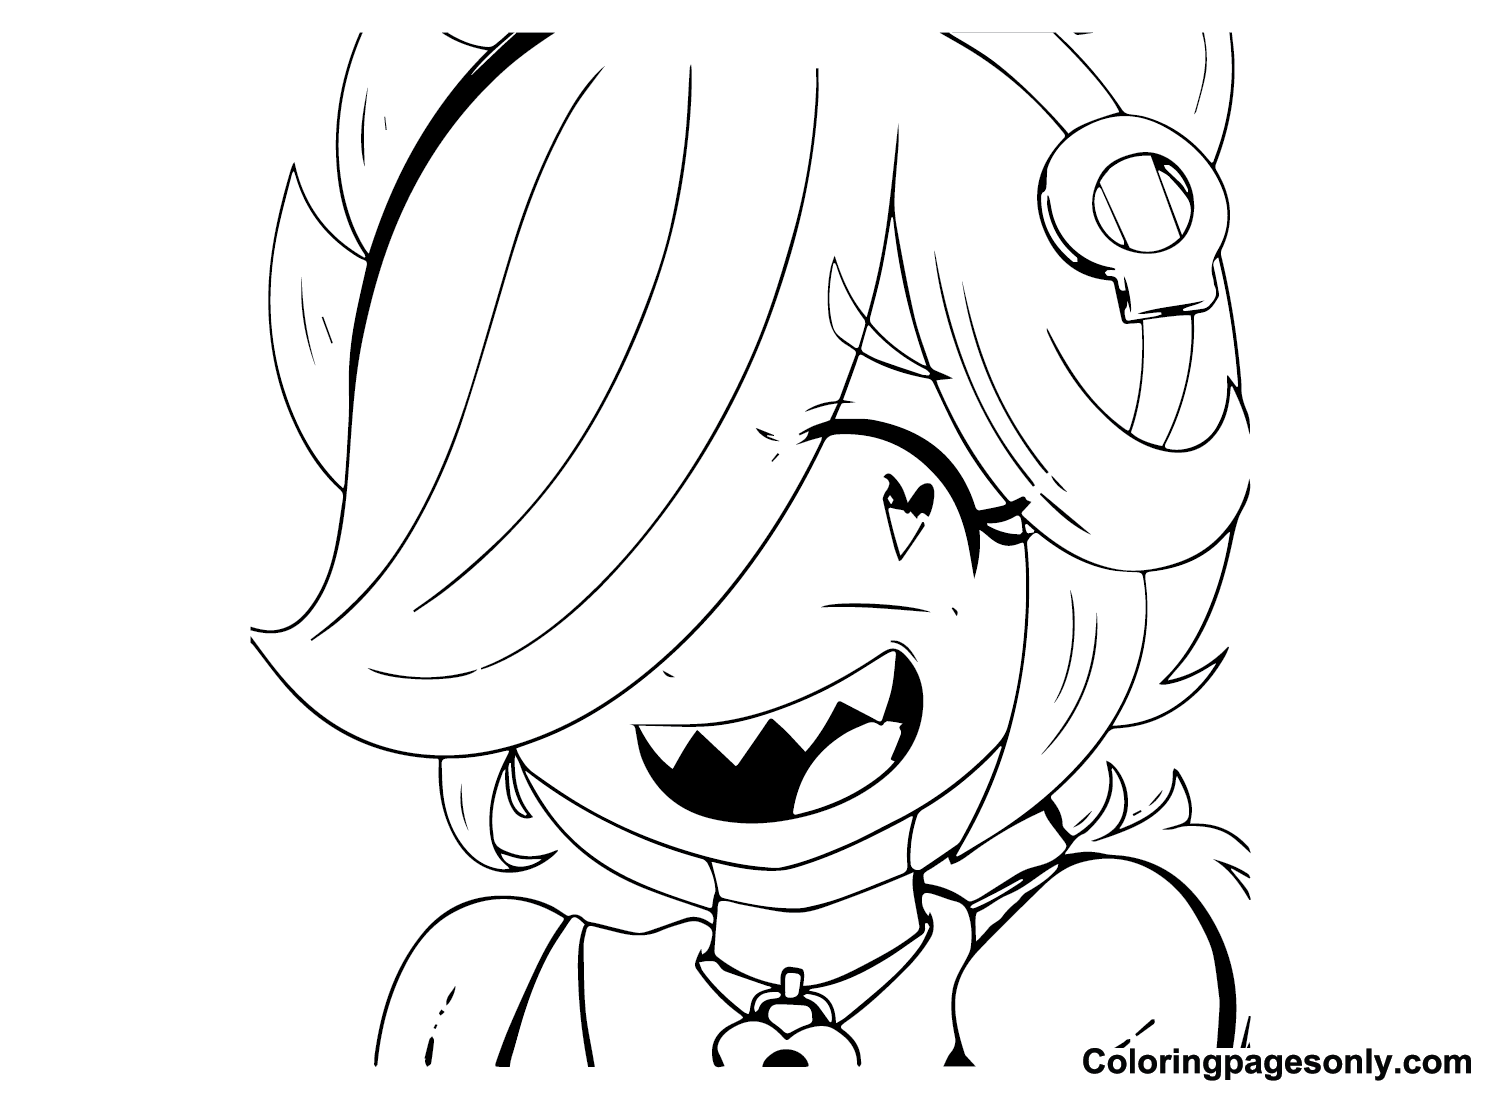 Cute Colette Brawl Stars Coloring Pages